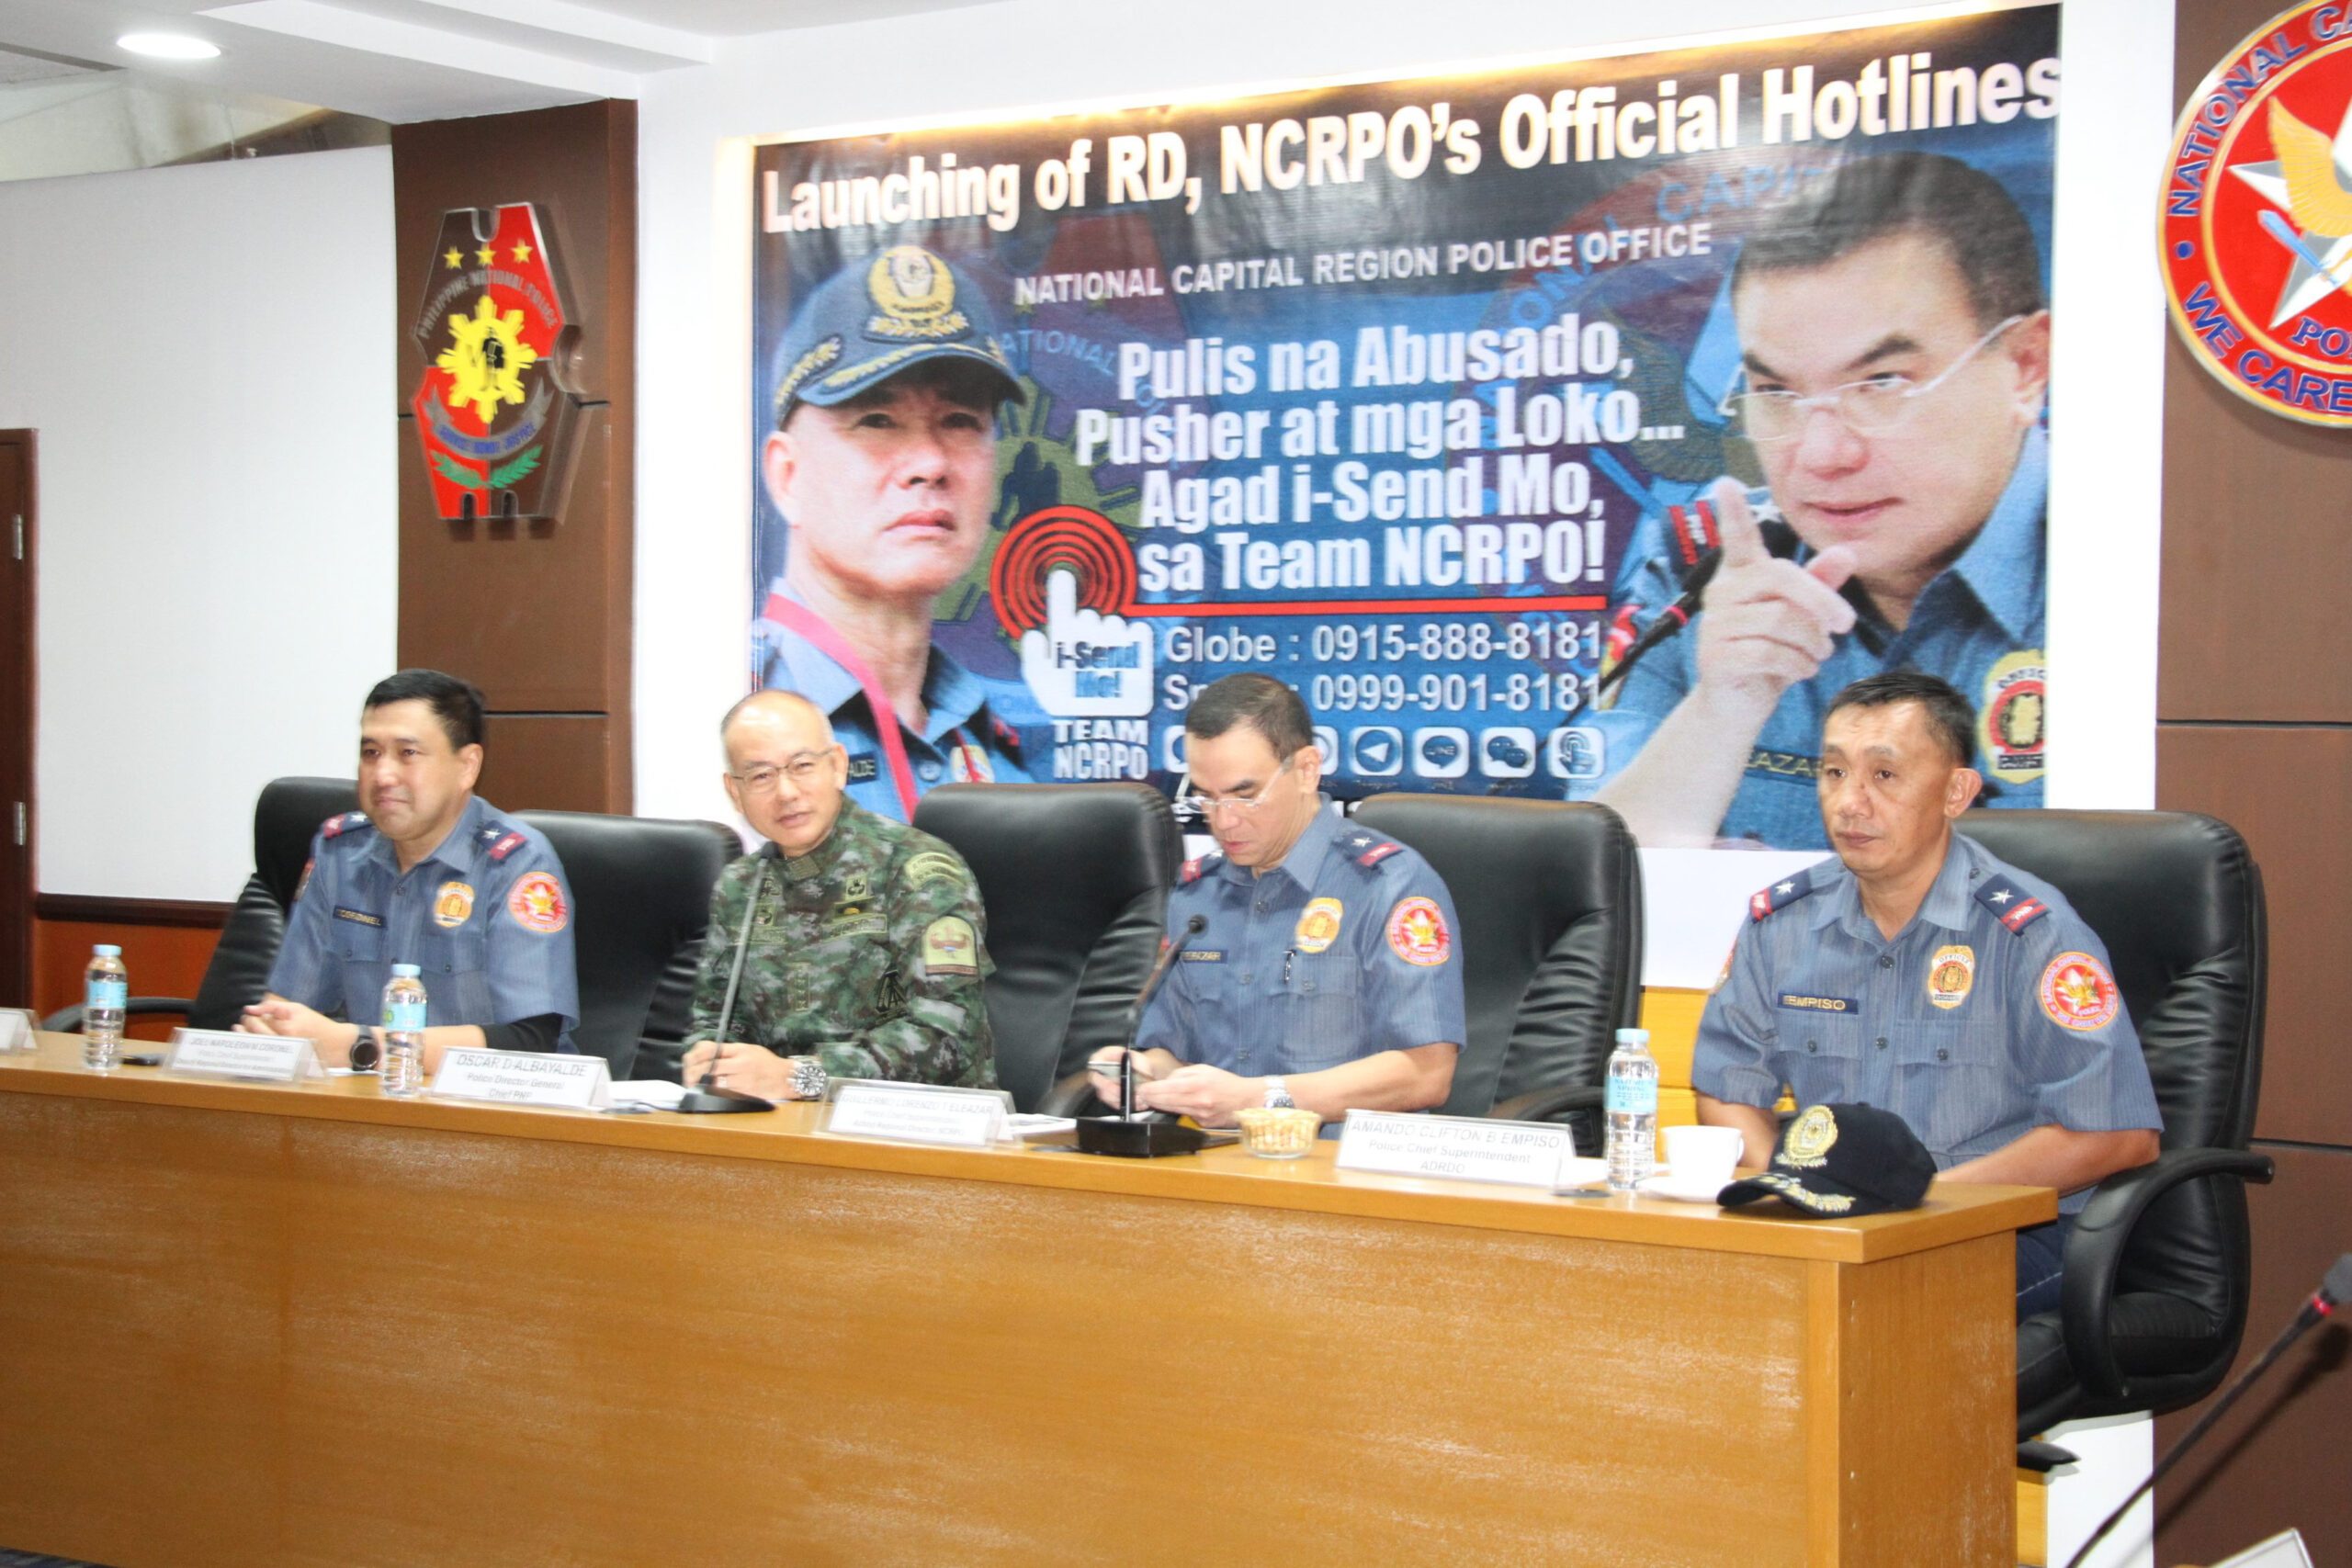 NCRPO launches hotline for reports on erring cops, crimes